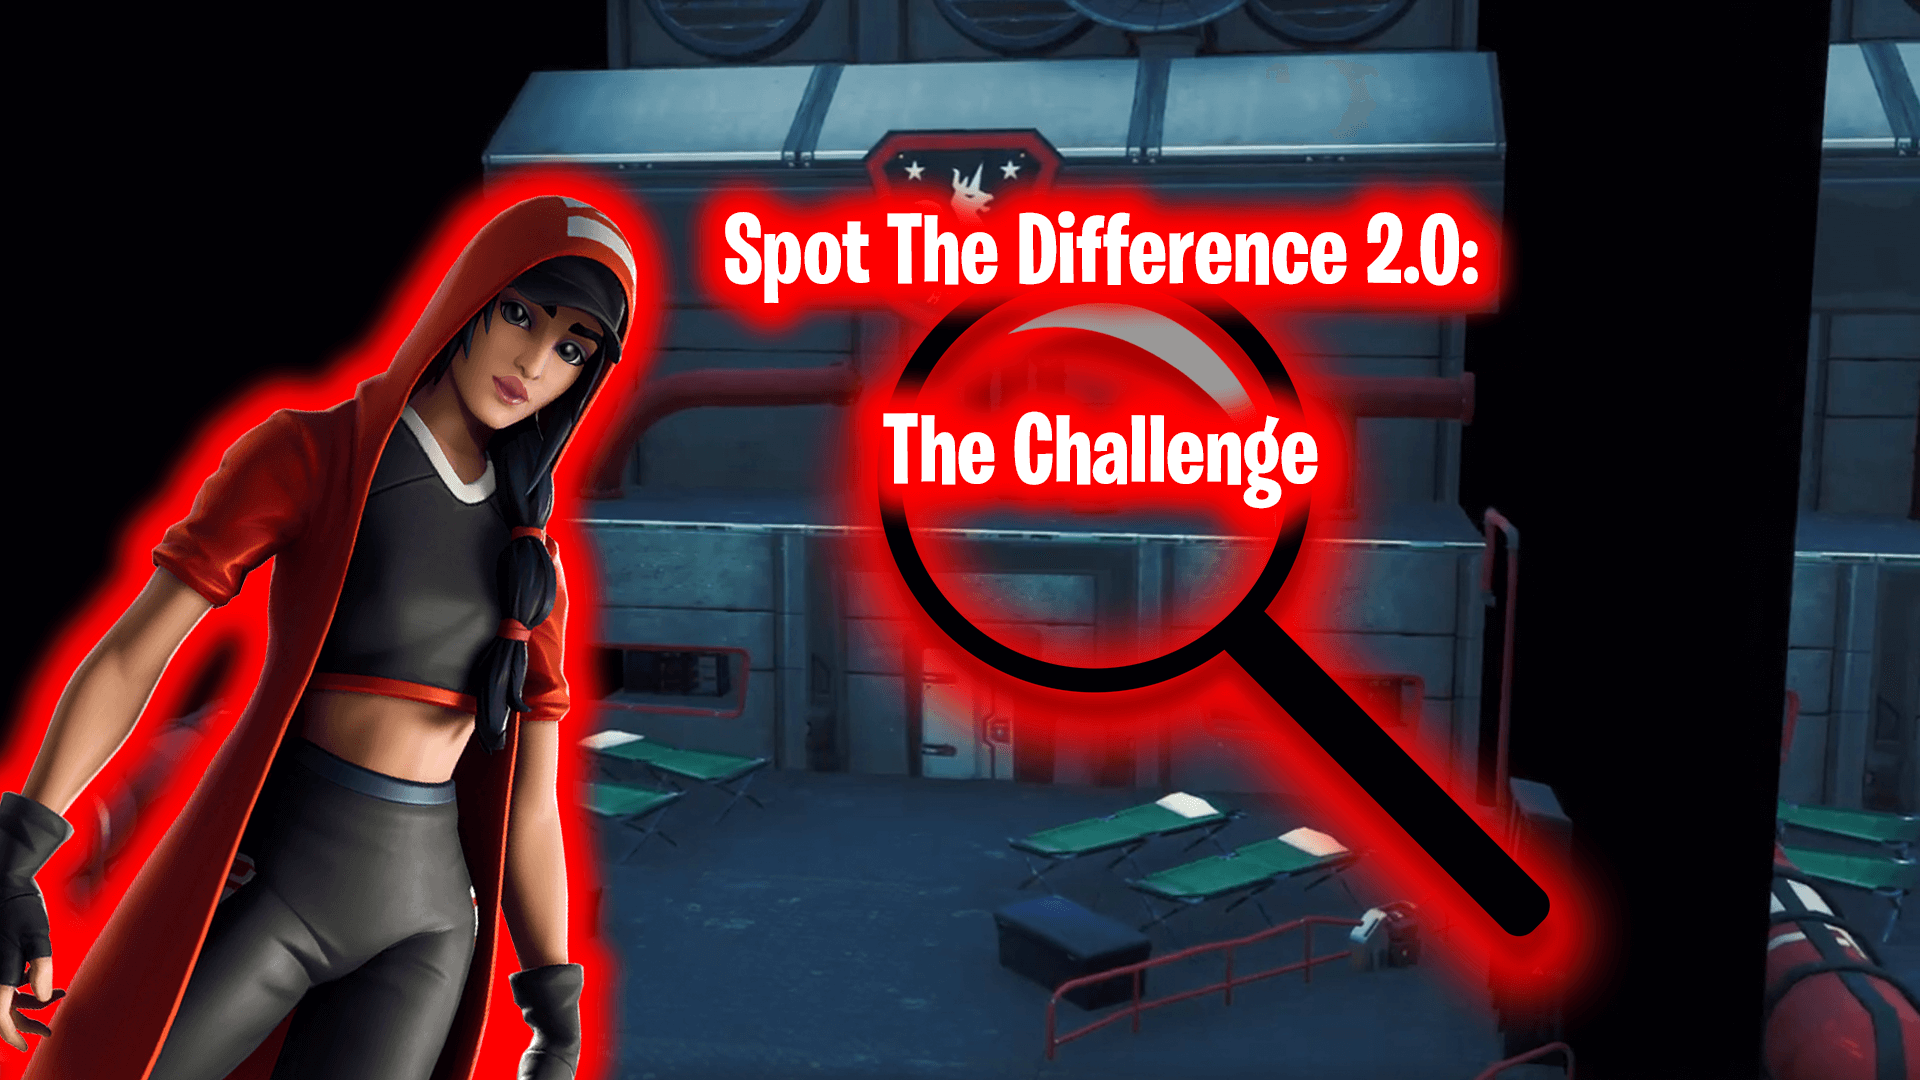 SPOT THE DIFFERENCE 2.0: THE CHALLENGE